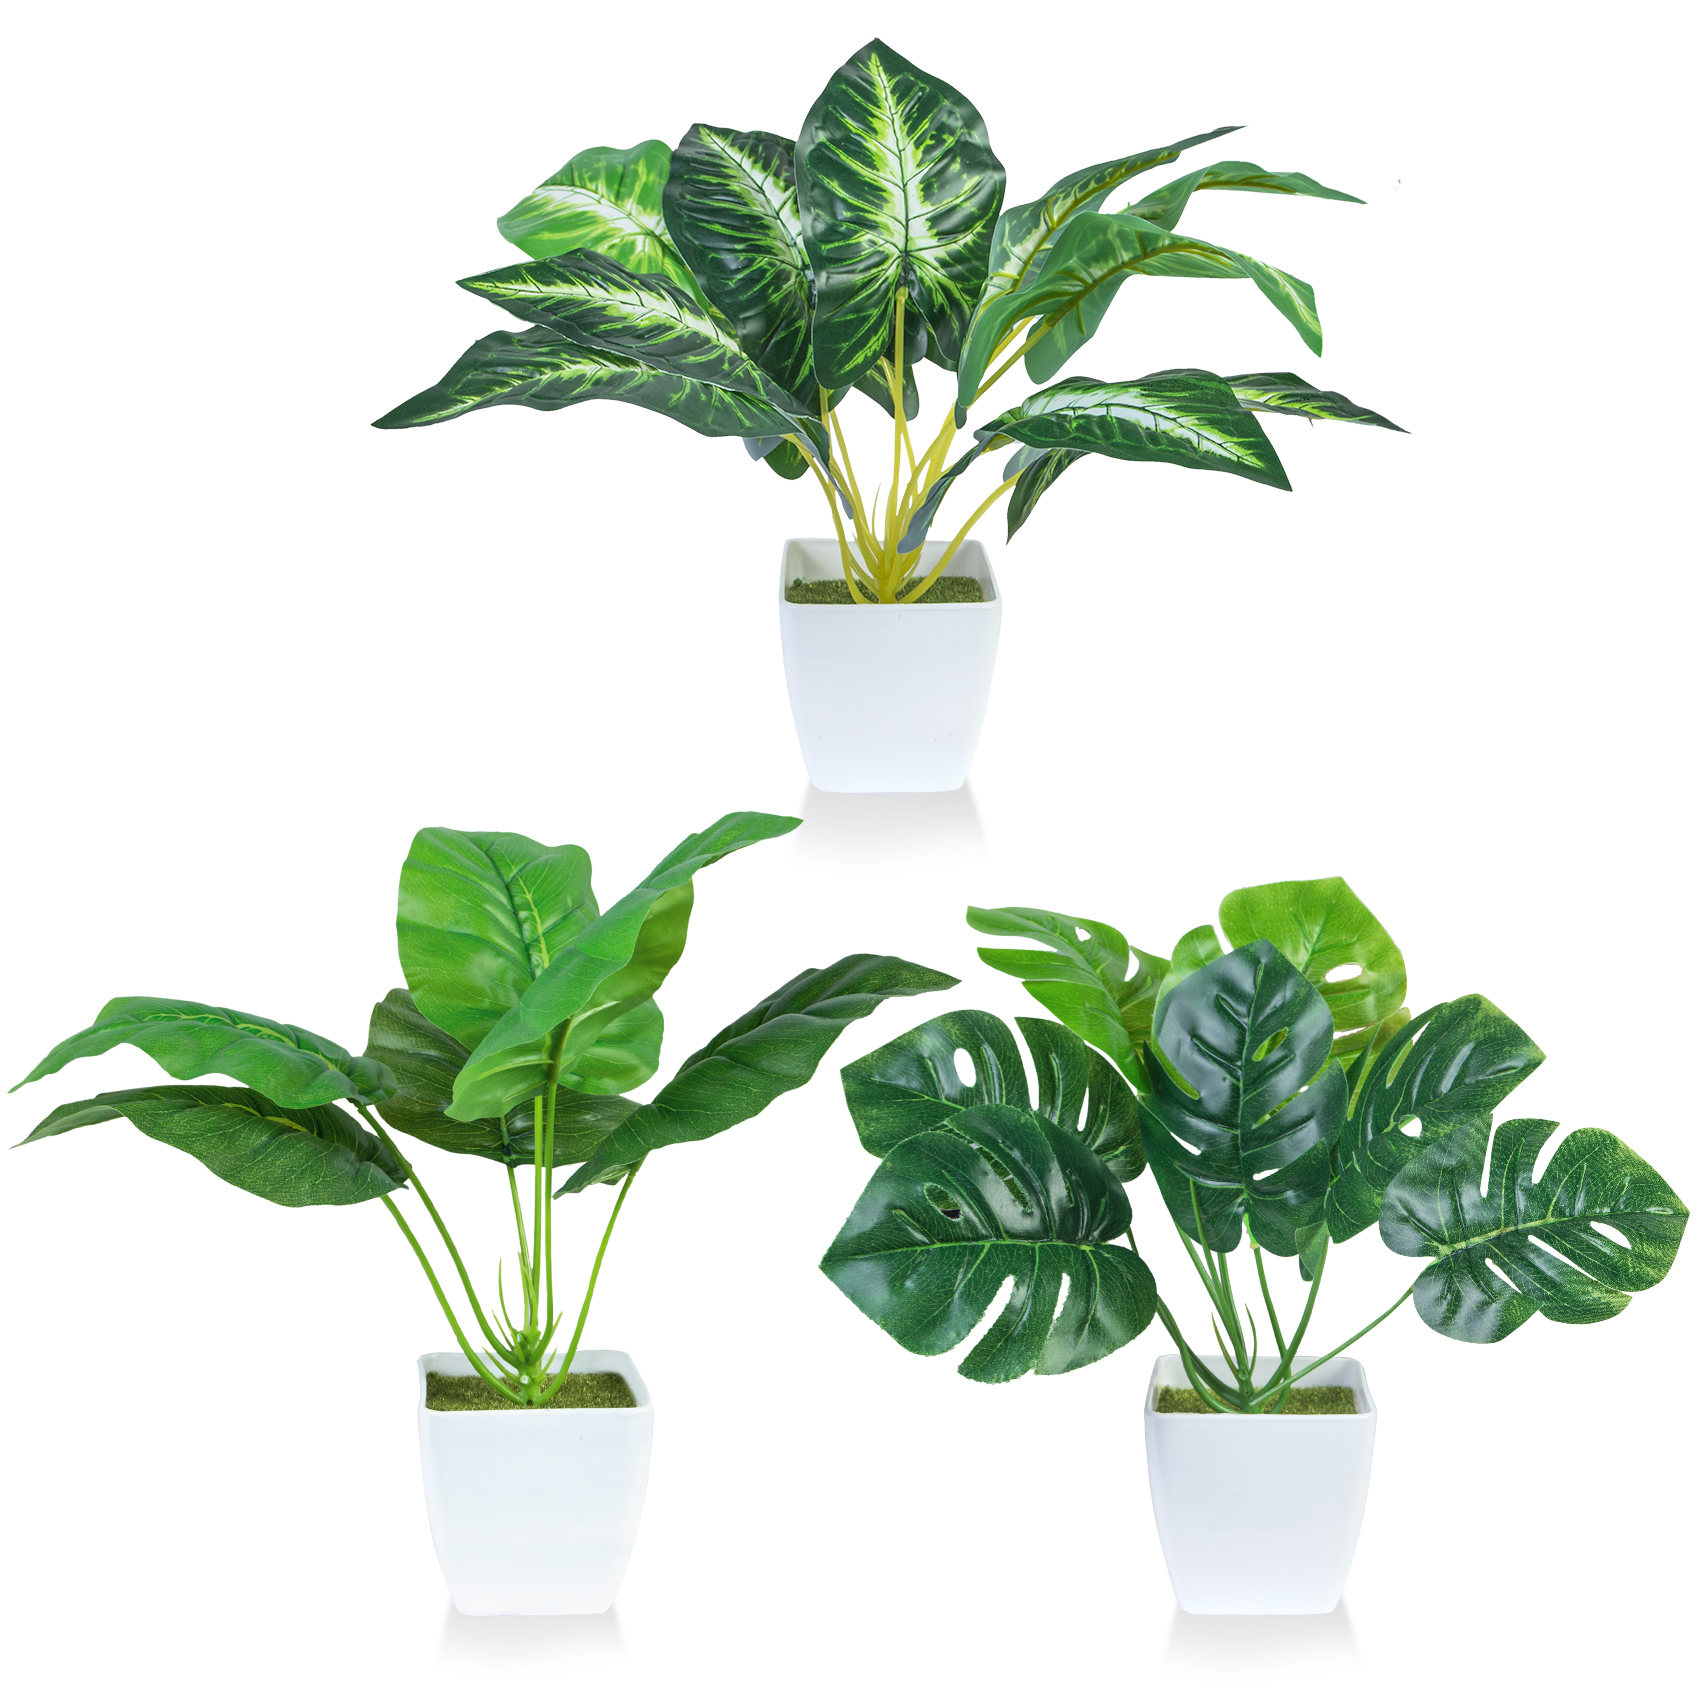 Ouddy Decor 3 Pack Small Fake Plants Artificial Mini Potted Plants